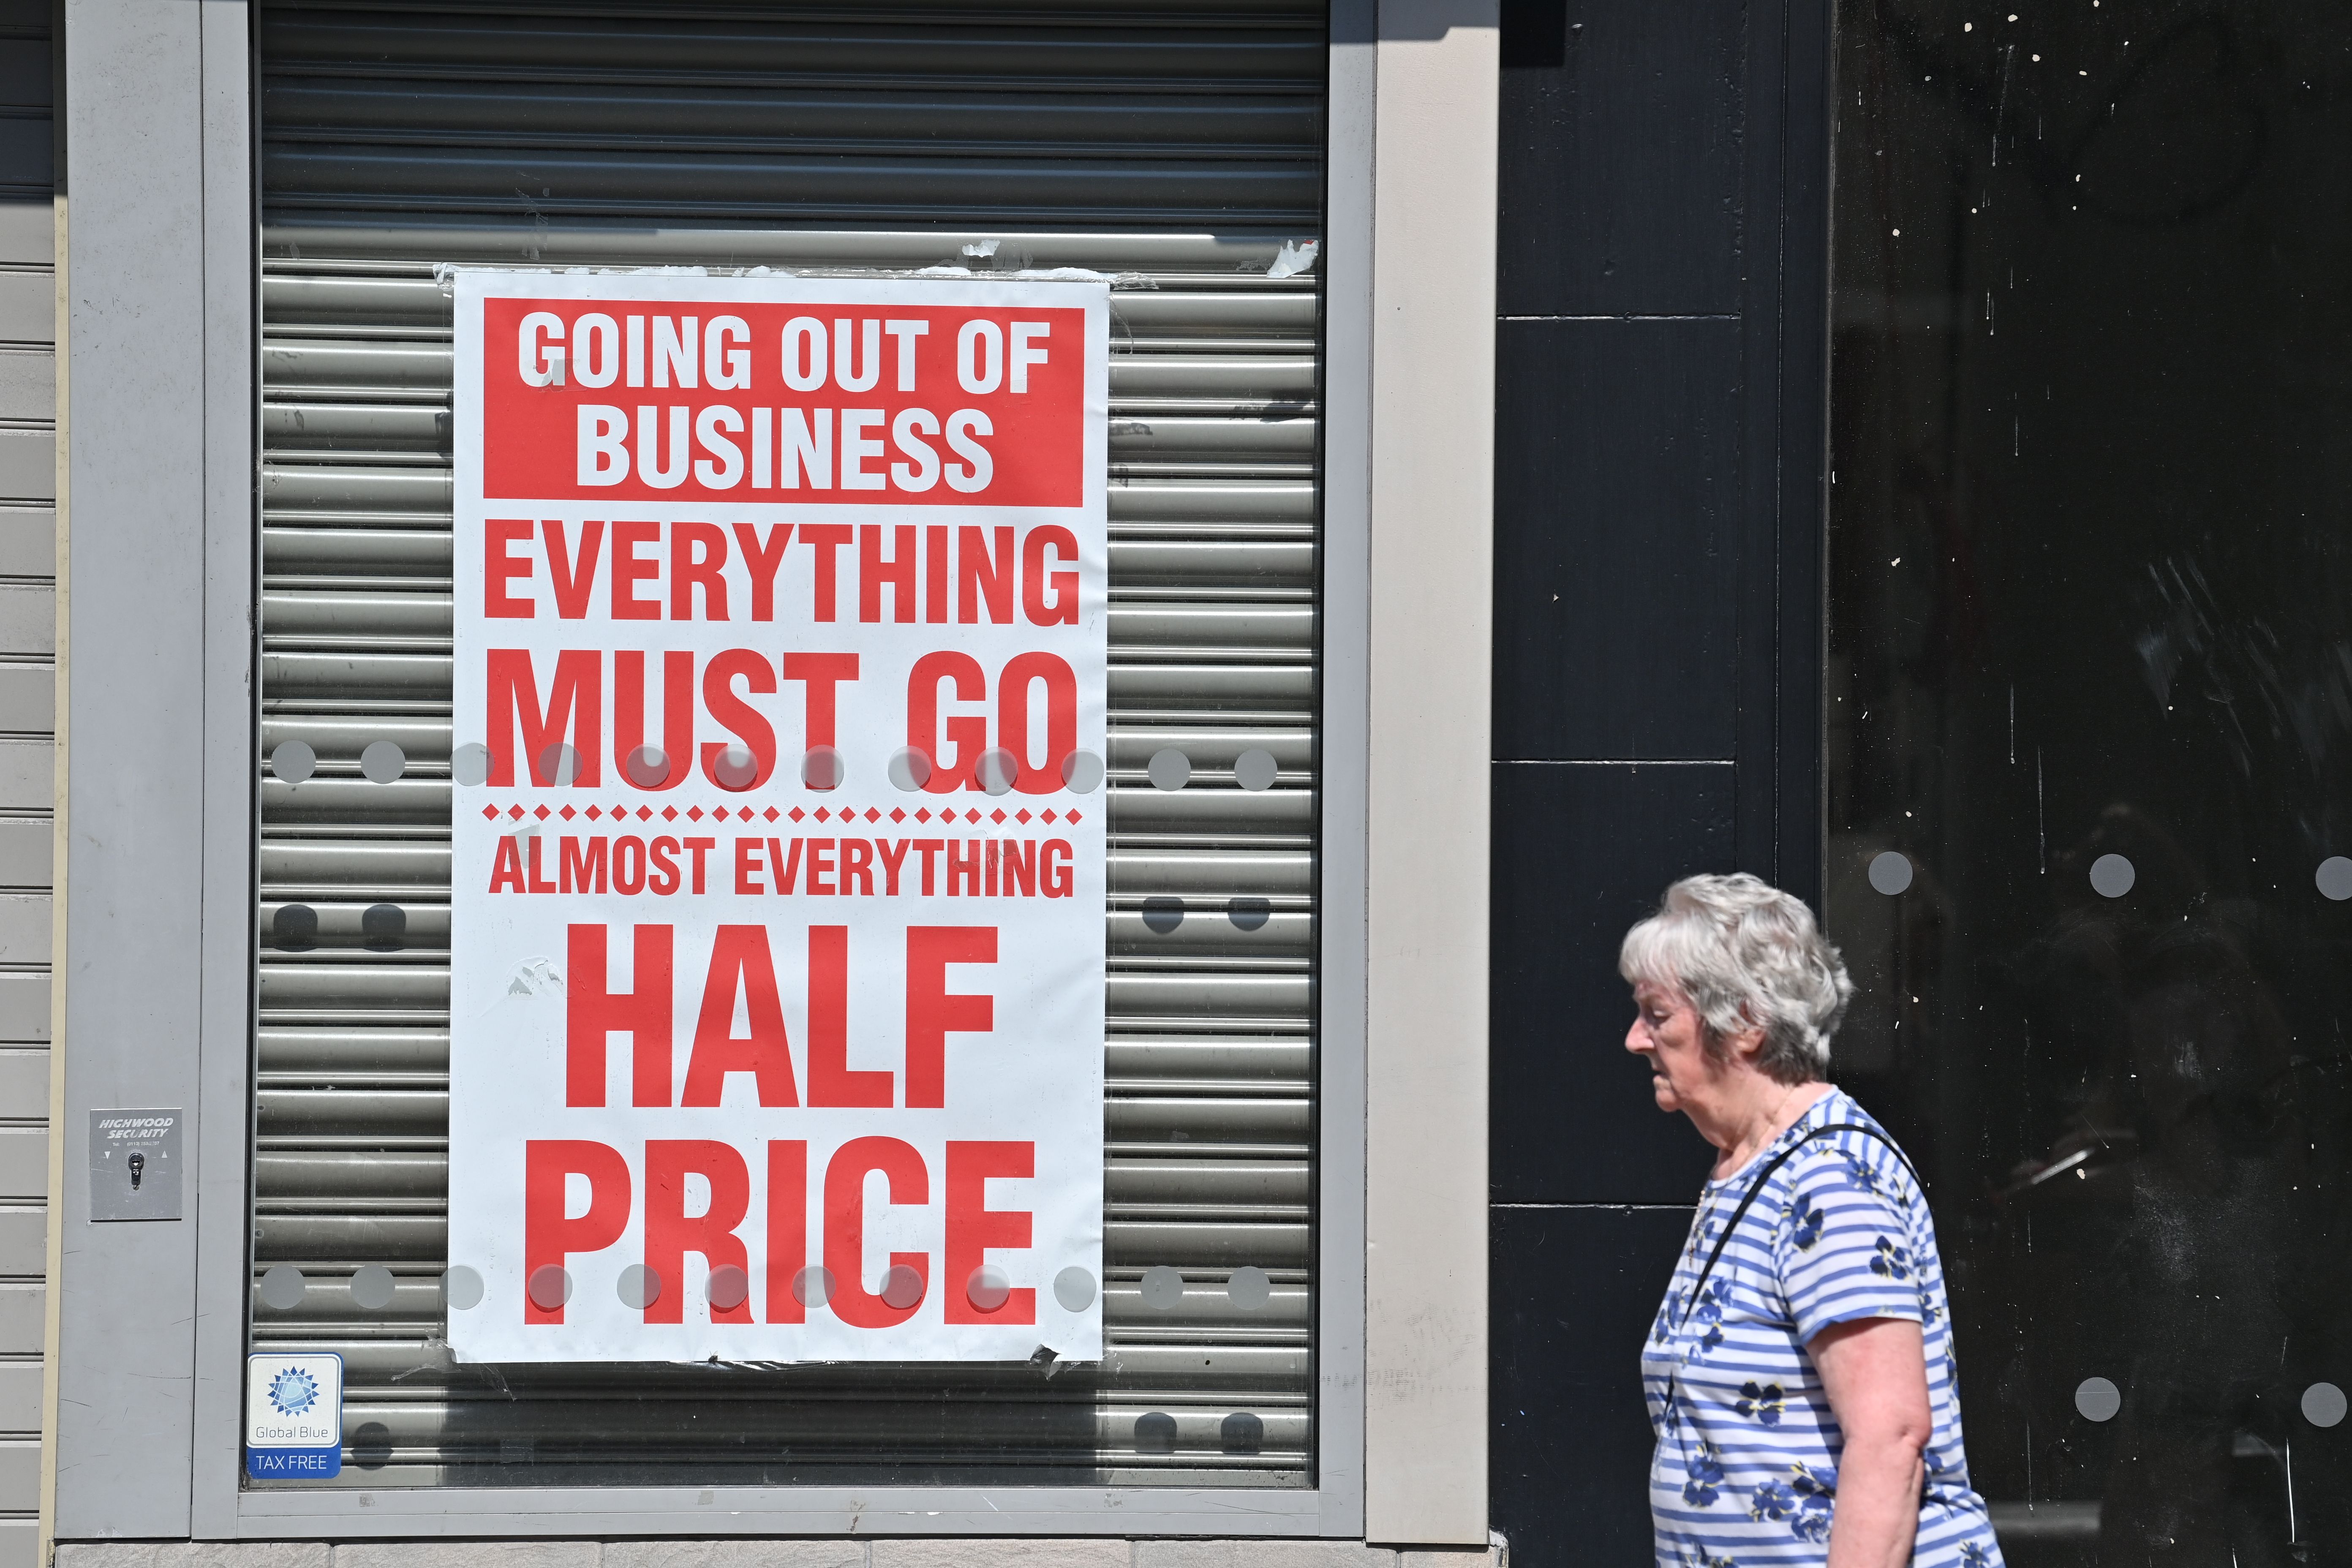 The cost of living crisis and energy price spike has seen many retailers shut